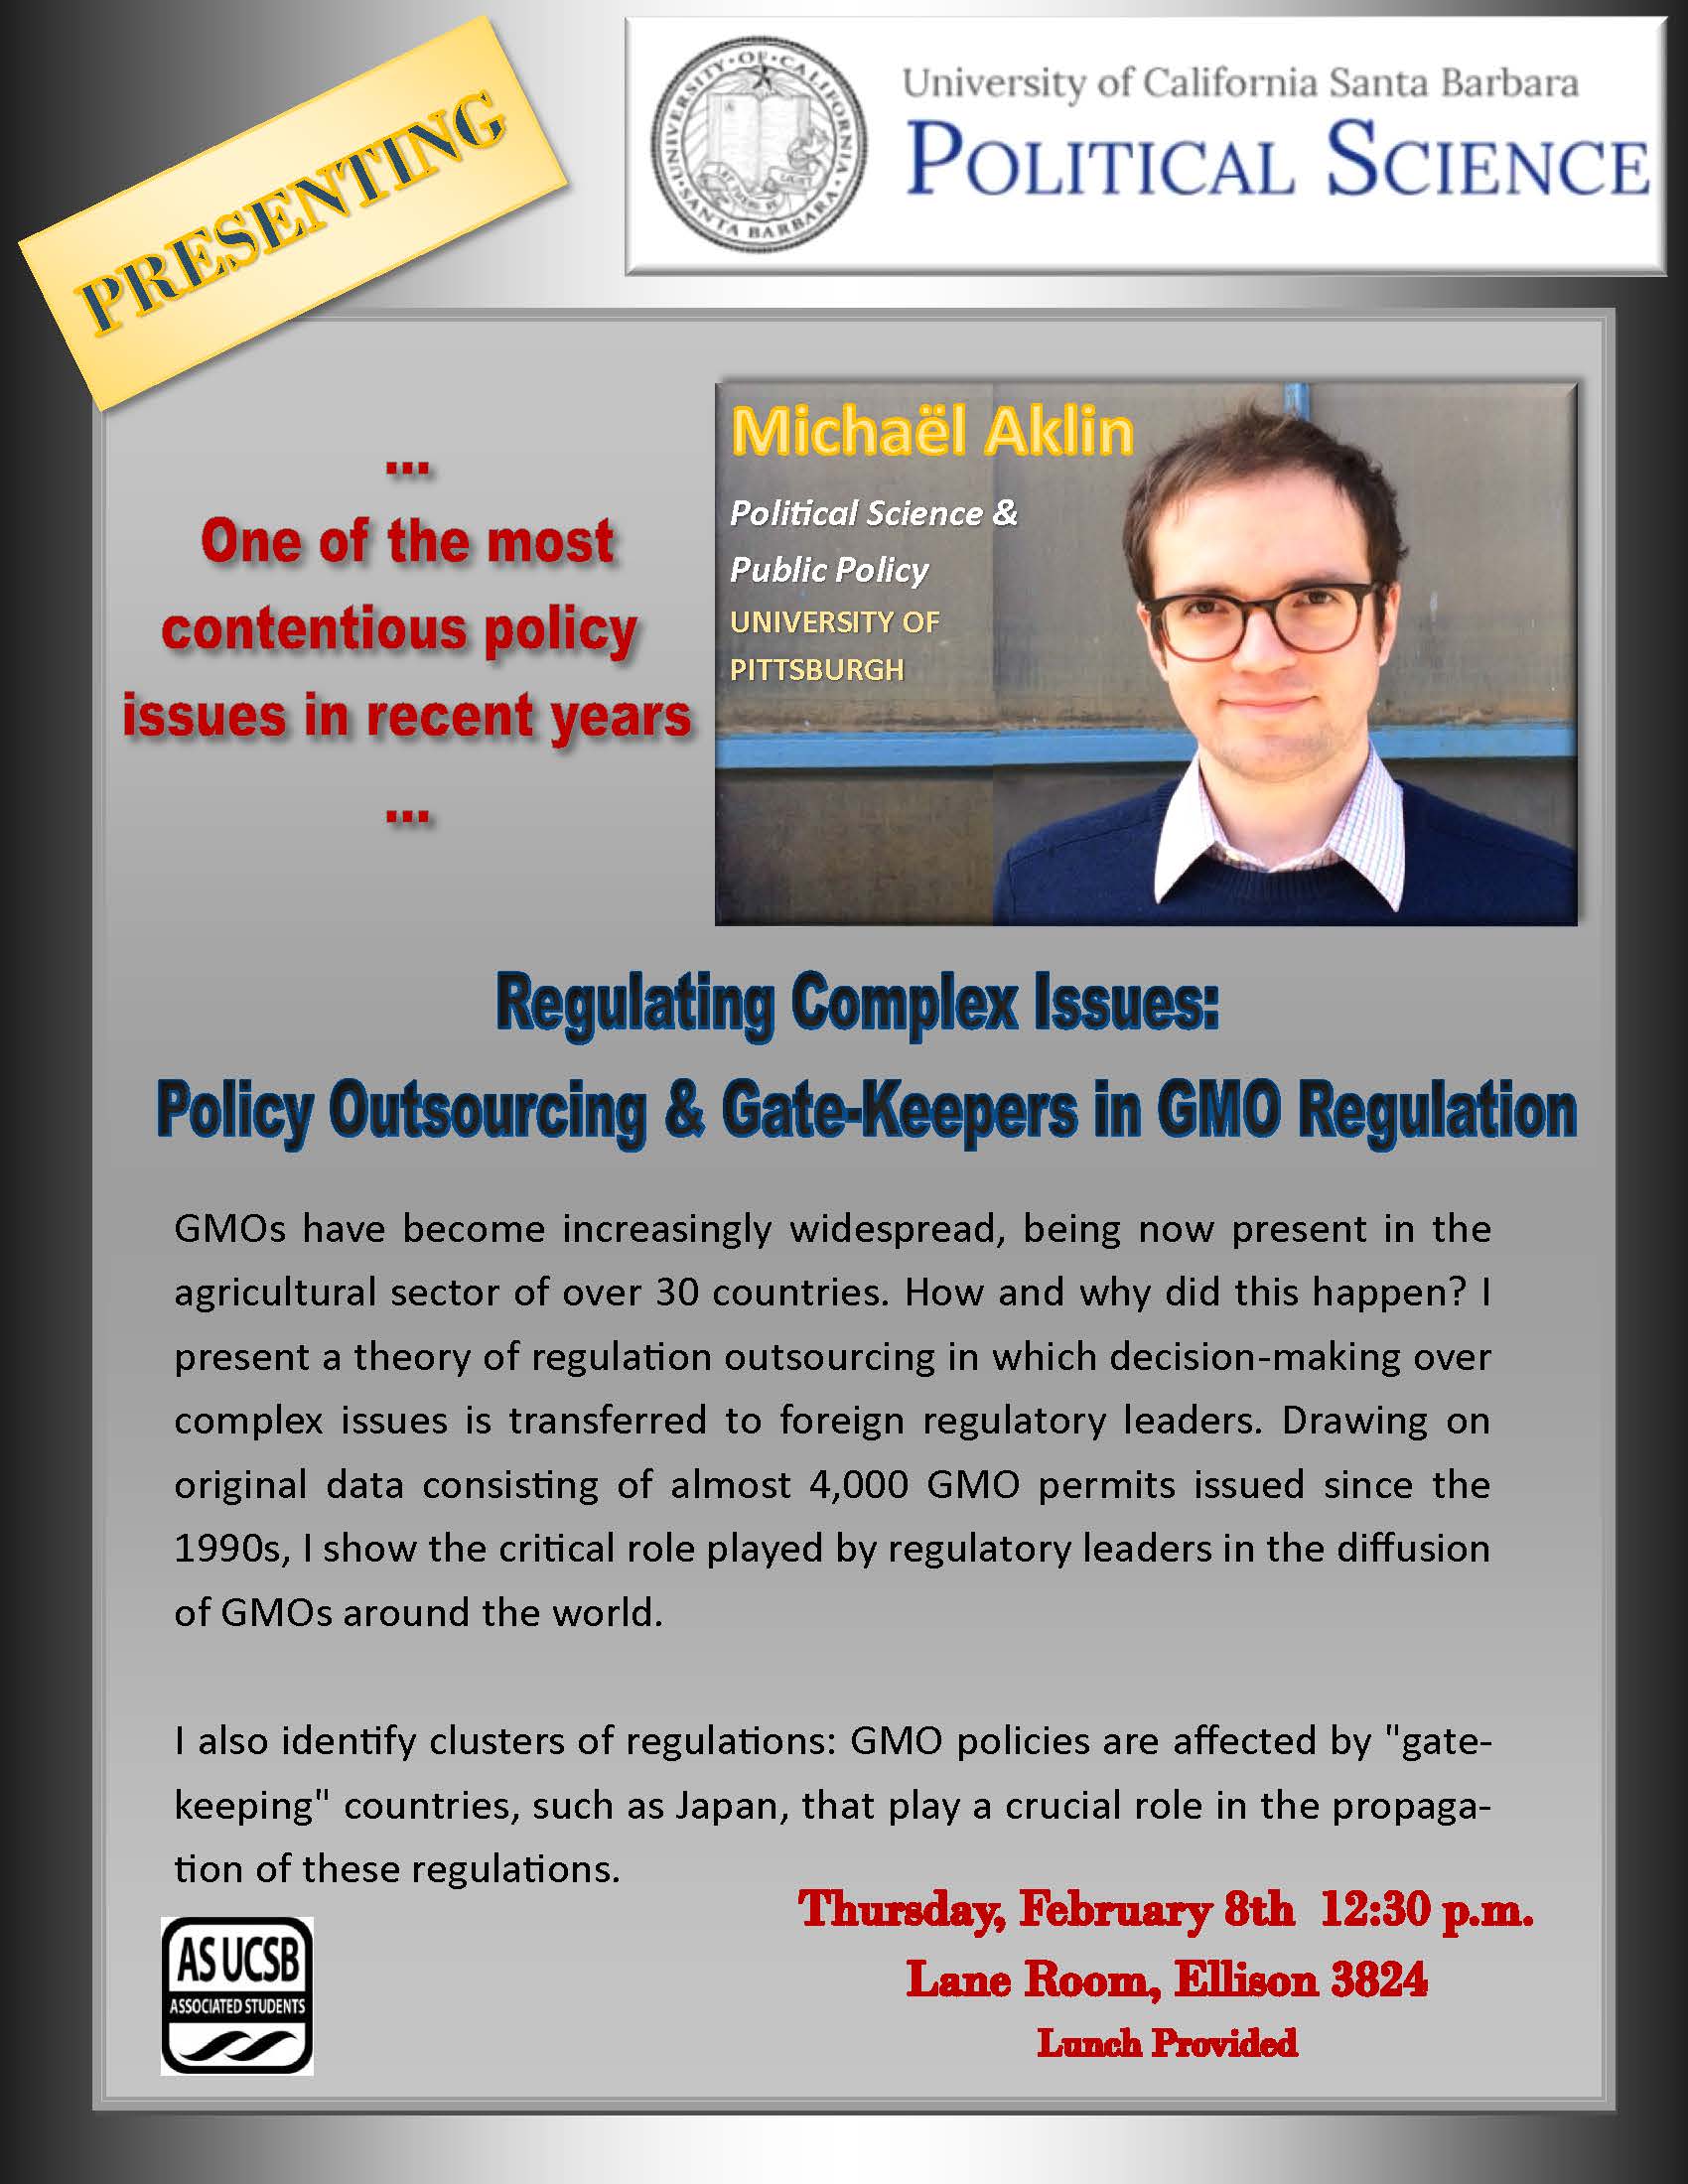 Flyer for Michaël Aklin's talk titled: "Regulating Complex Issues: Policy Outsourcing & Gake-Keepers in GMO Regulation"